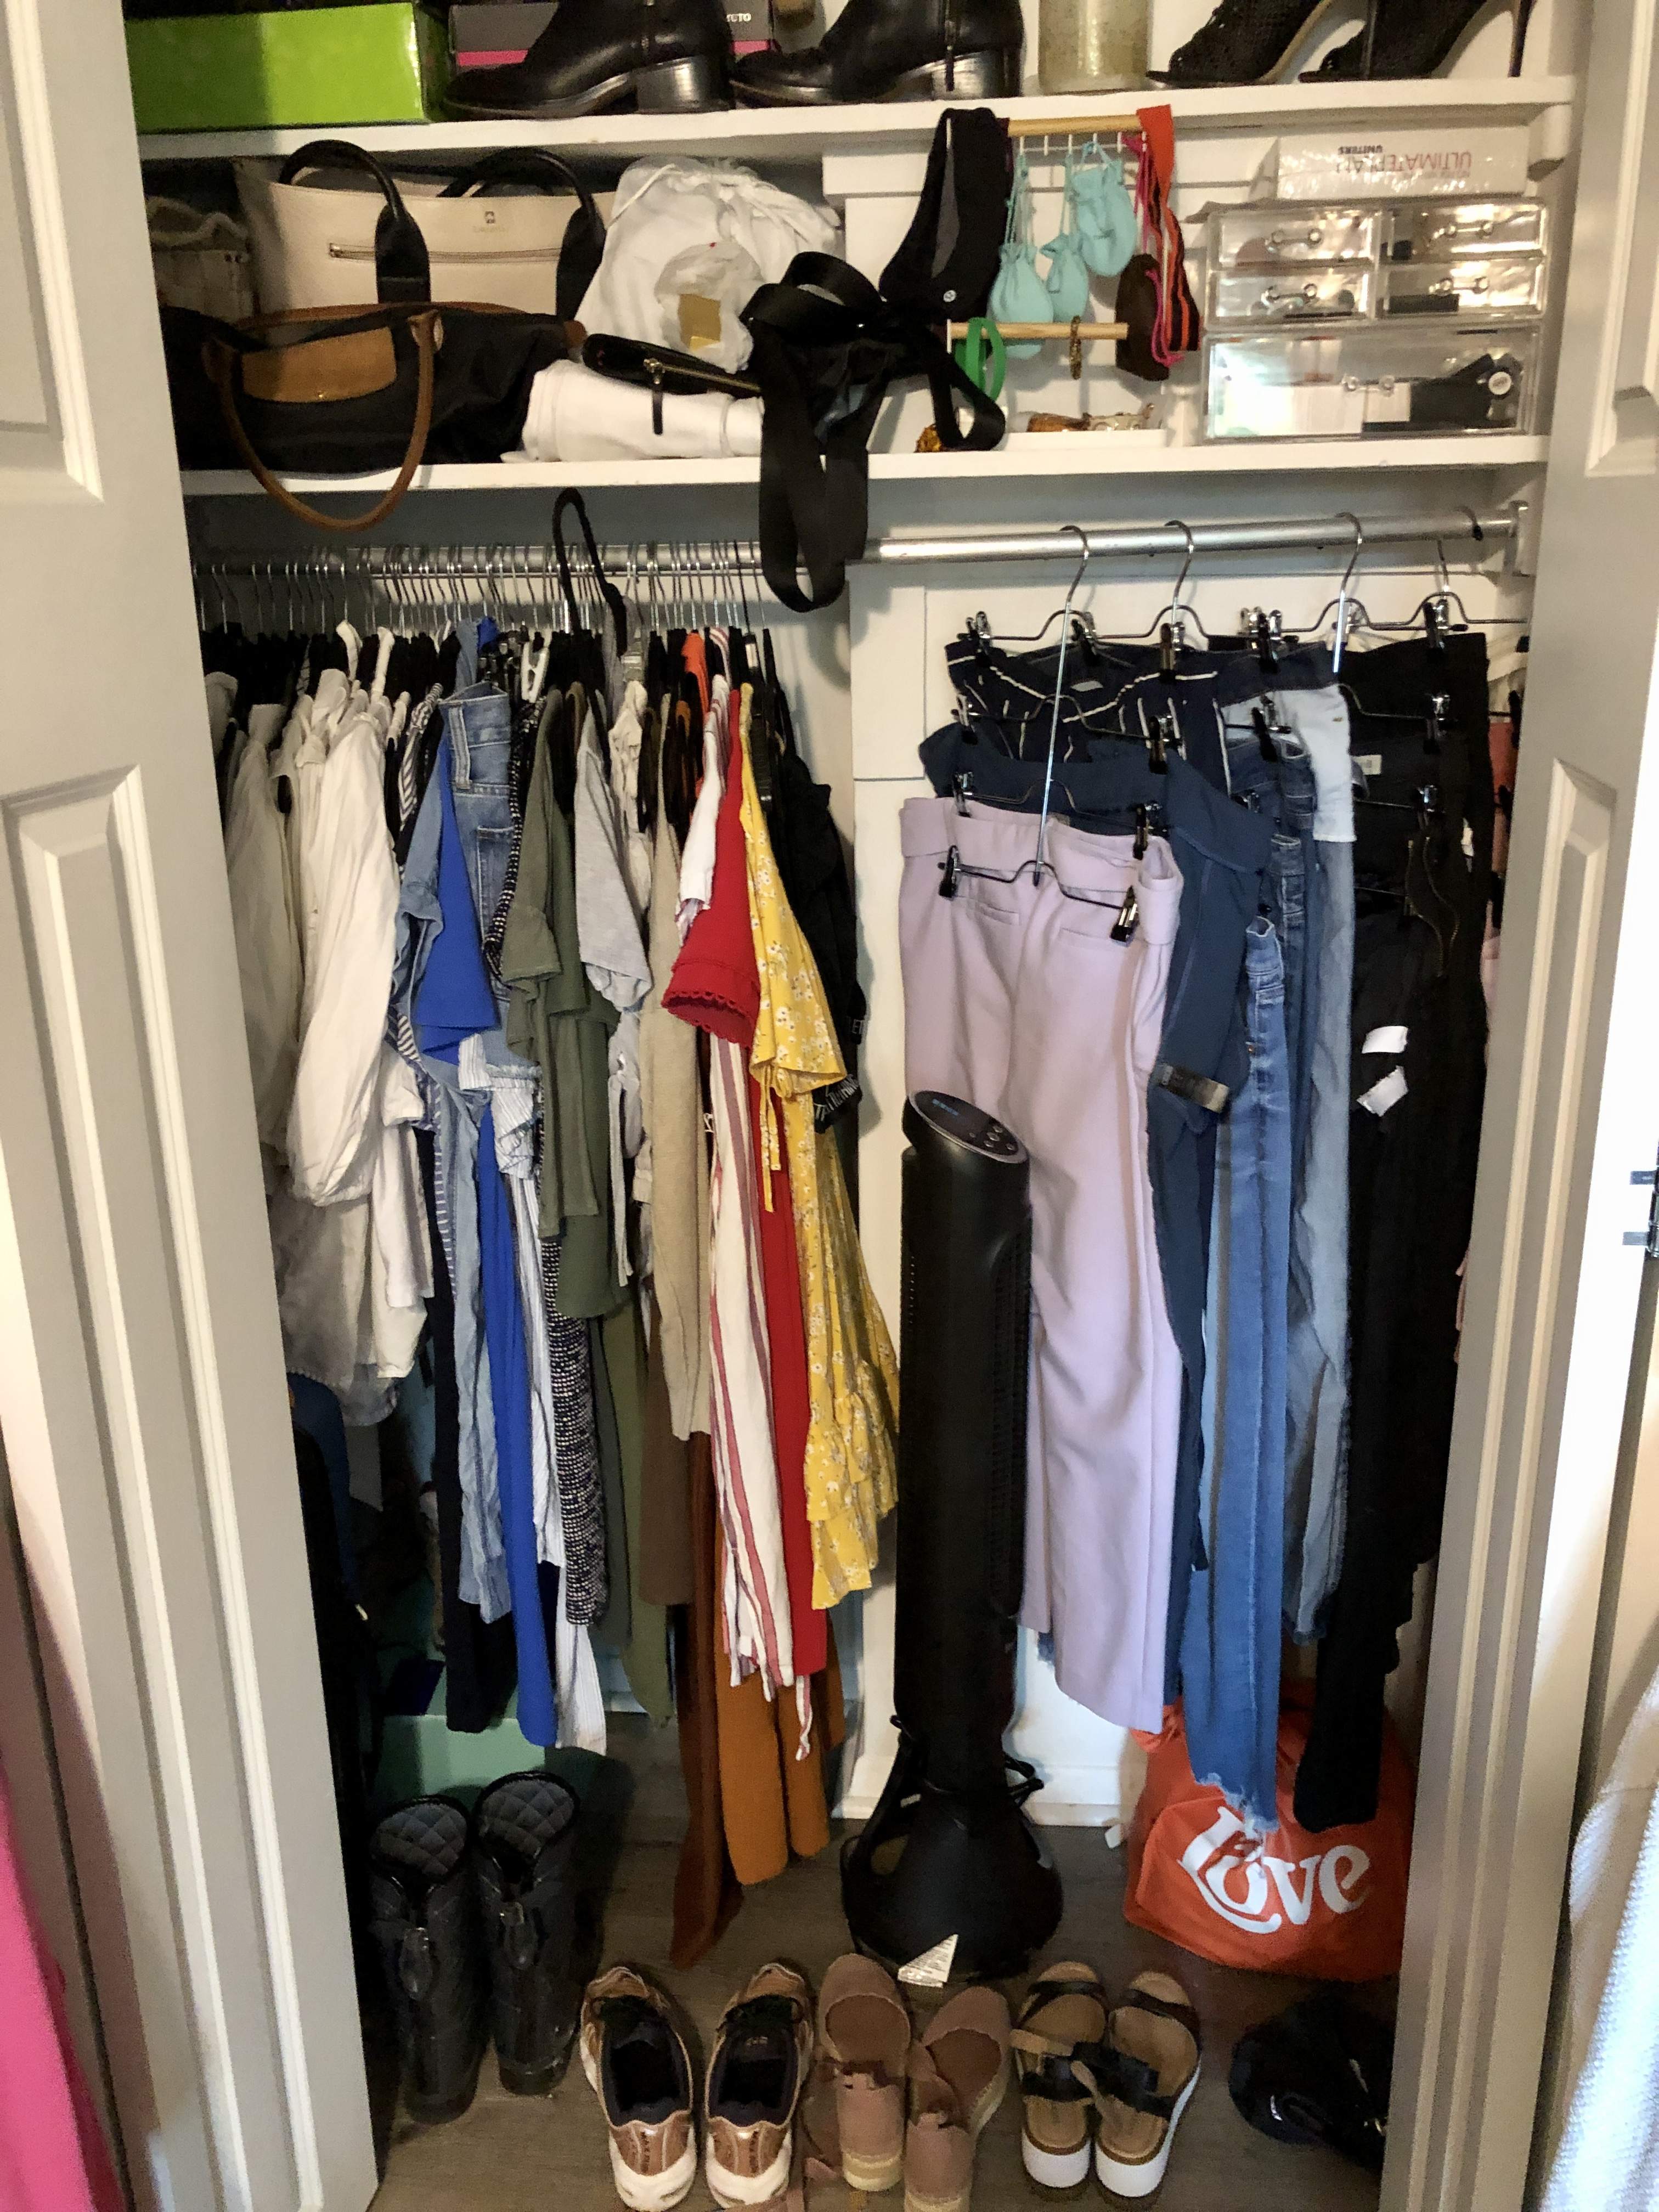 Disorganized closet with clothes not categorized and wasted space at the front